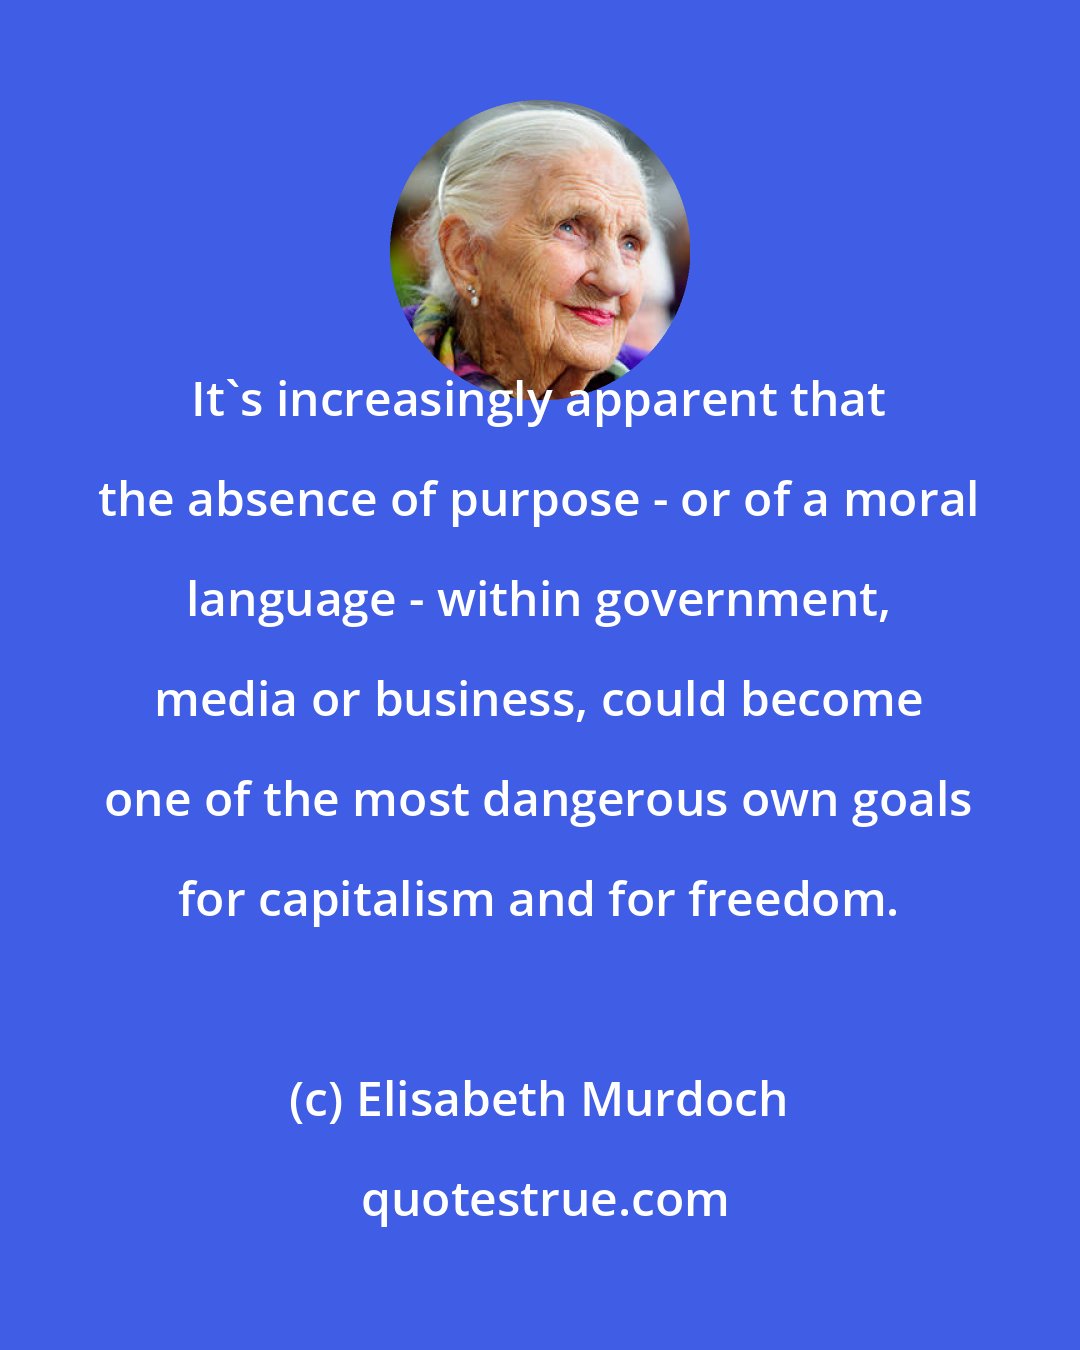 Elisabeth Murdoch: It's increasingly apparent that the absence of purpose - or of a moral language - within government, media or business, could become one of the most dangerous own goals for capitalism and for freedom.